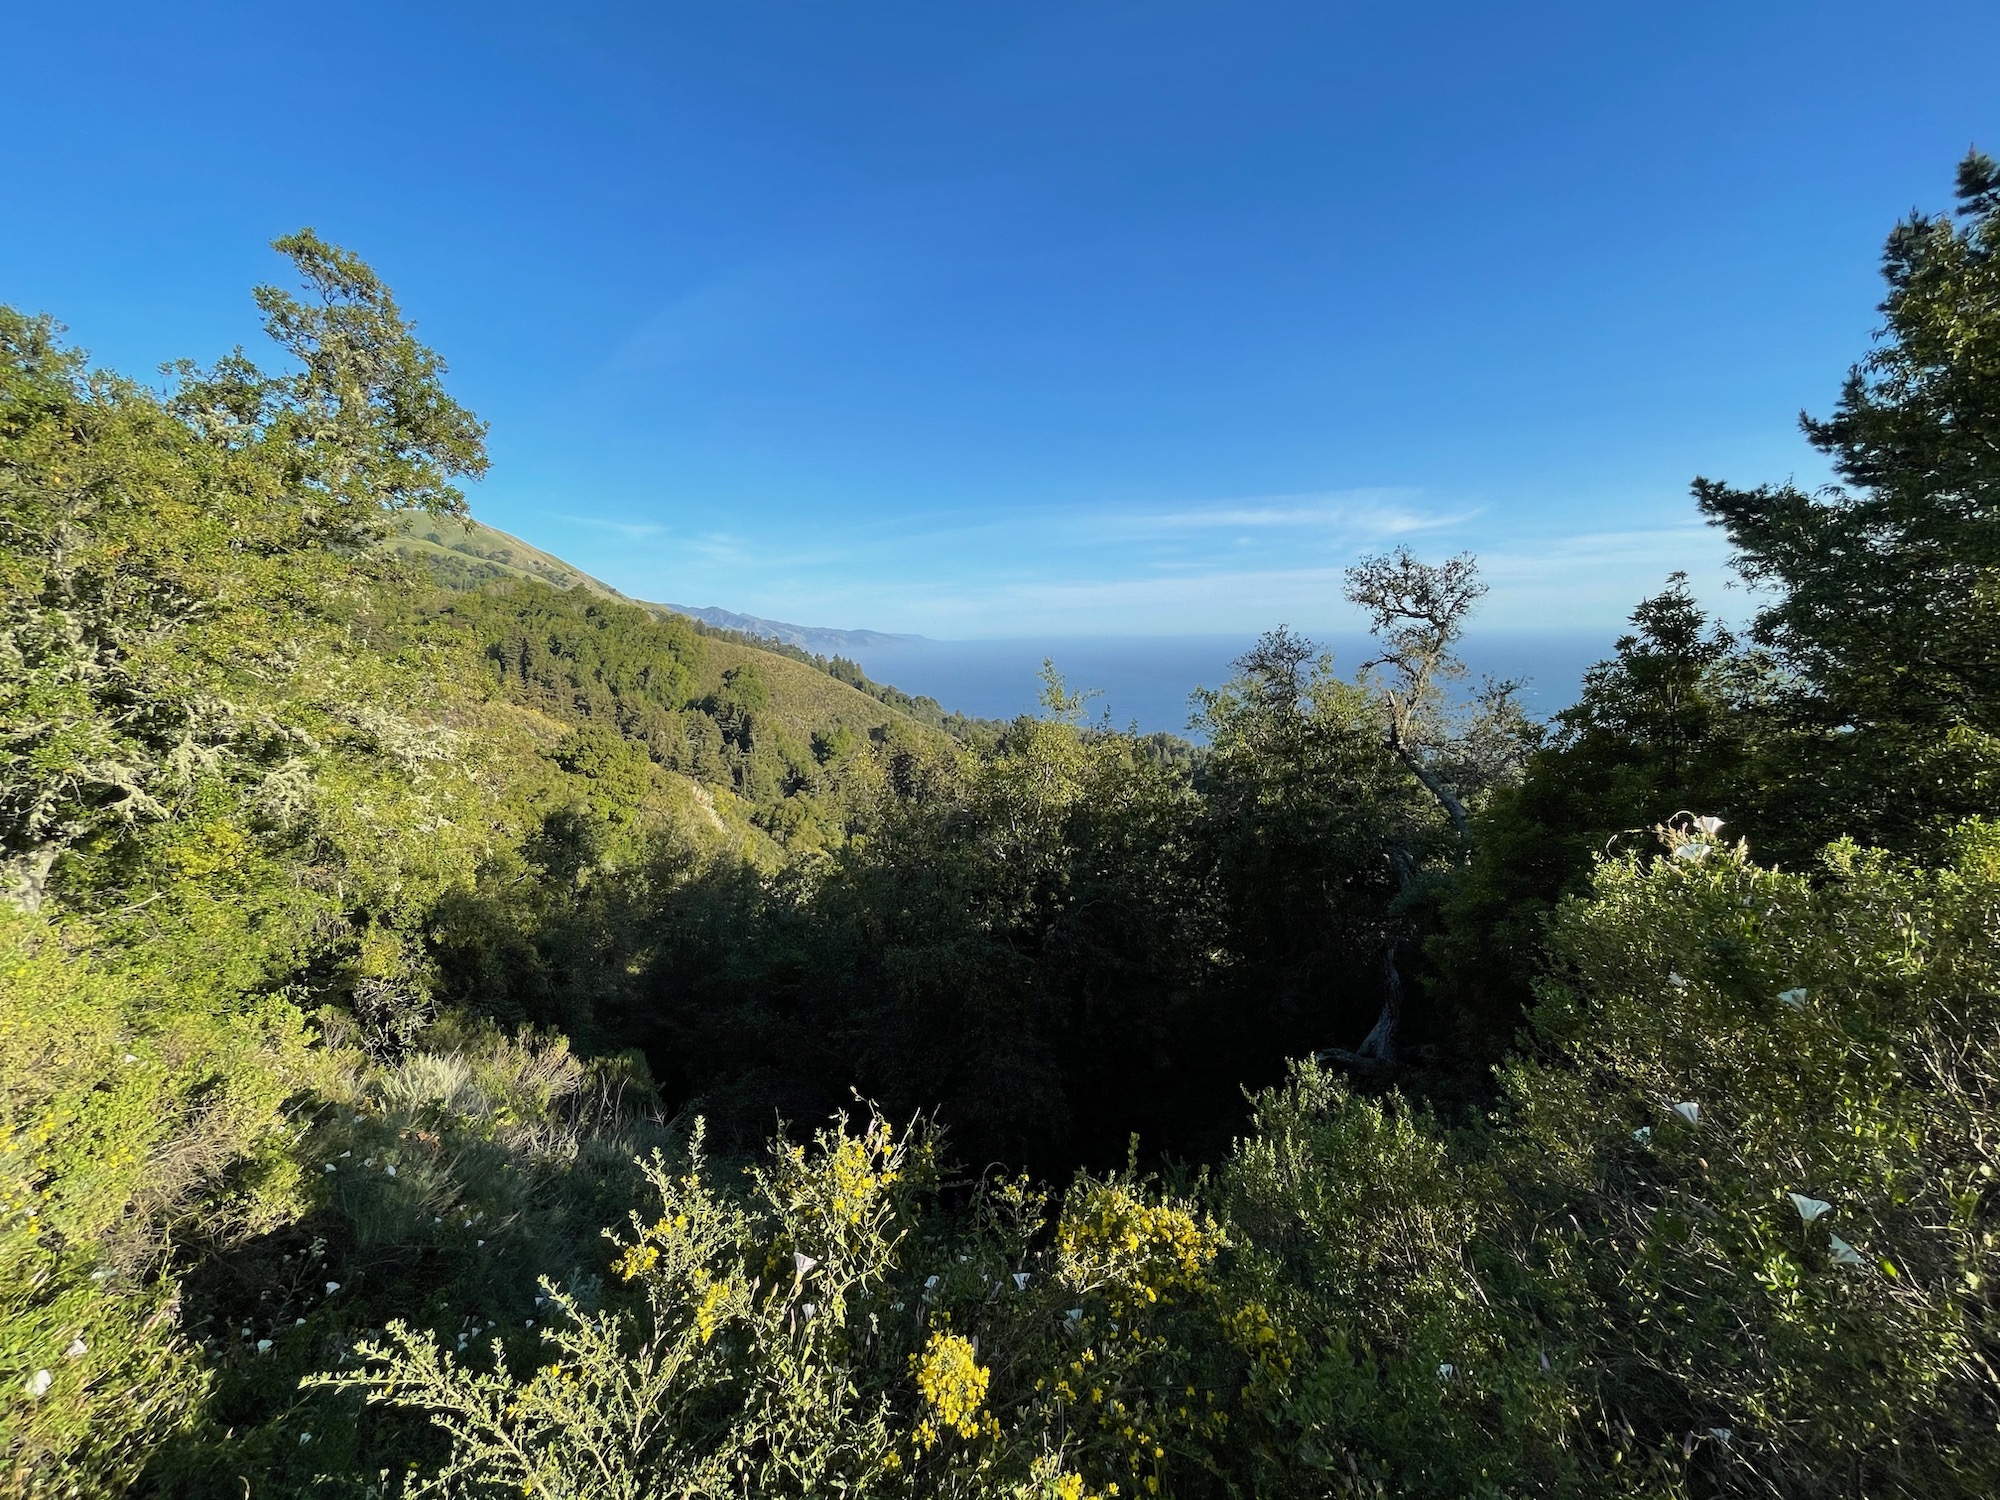 a view of a forest and the ocean from a hill